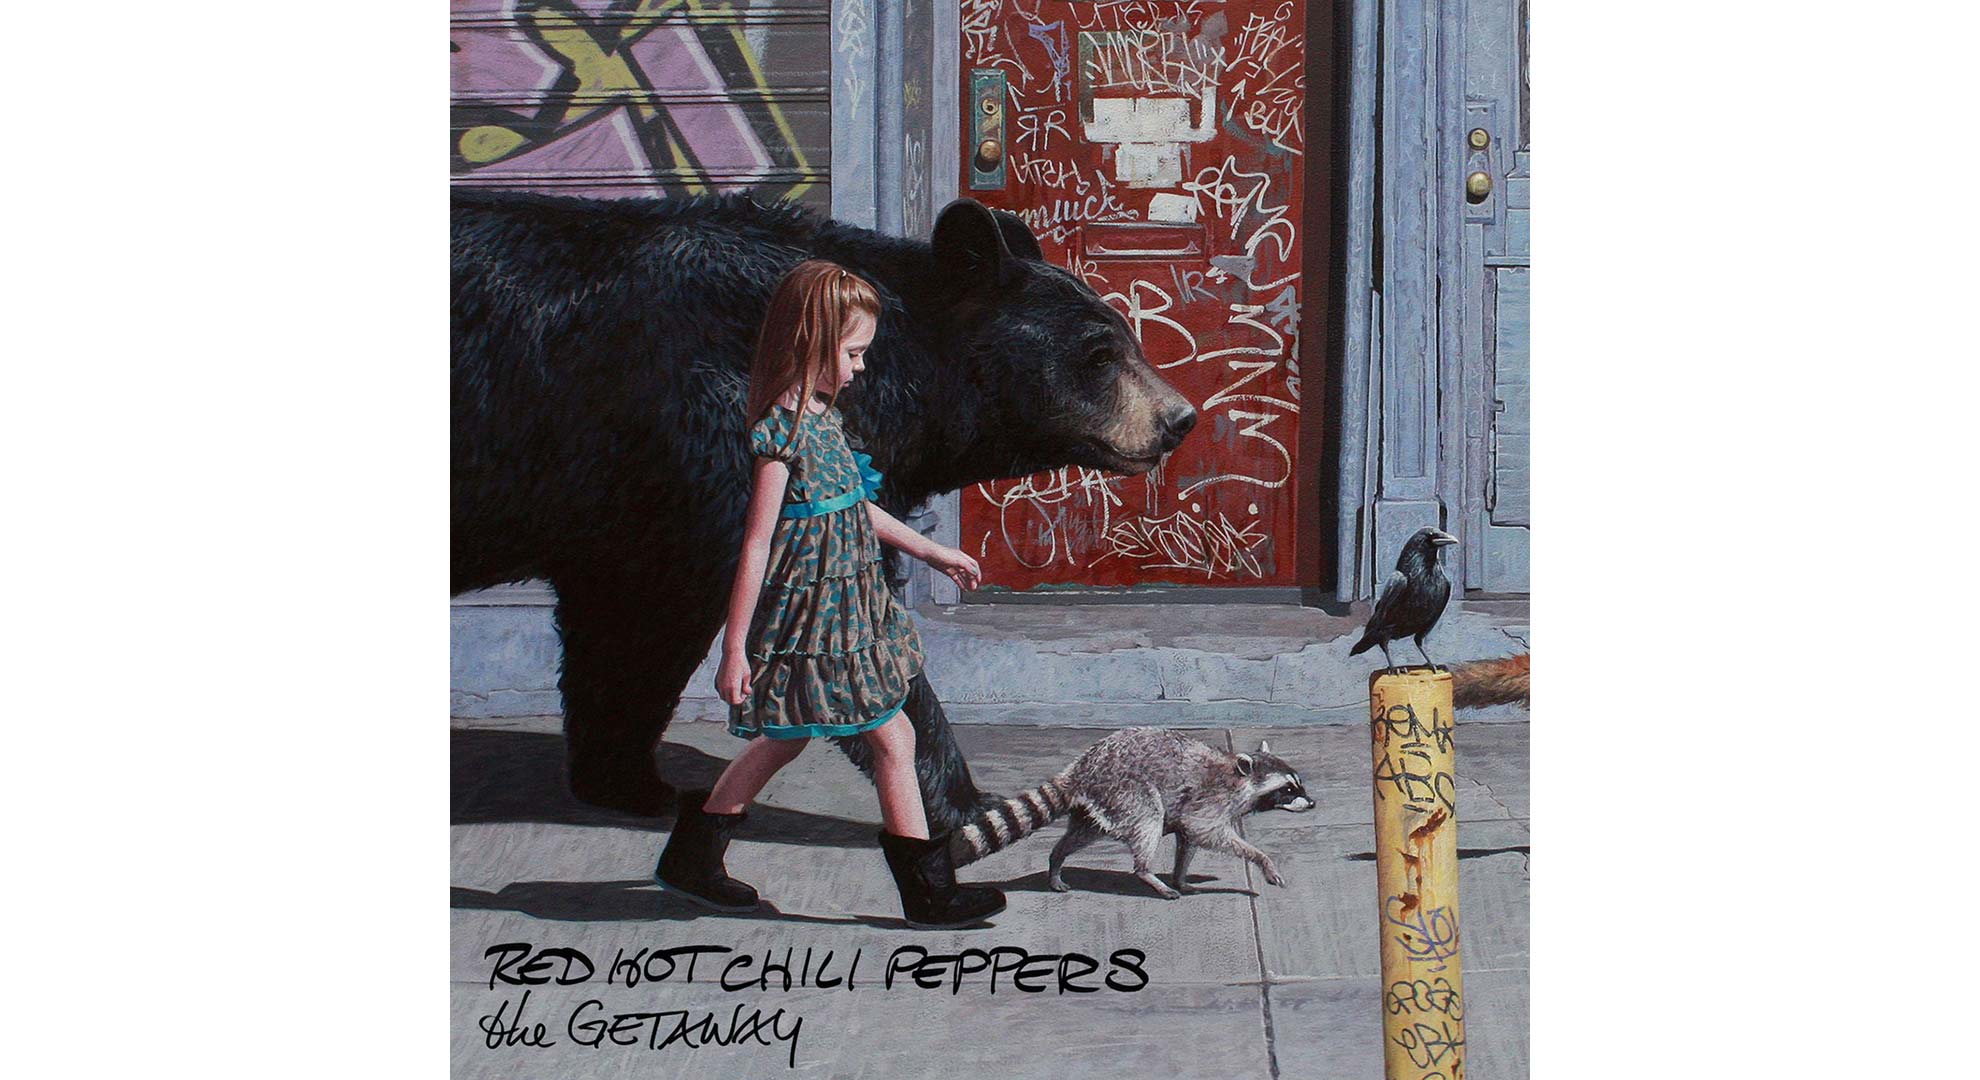 Red hot chili peppers dark